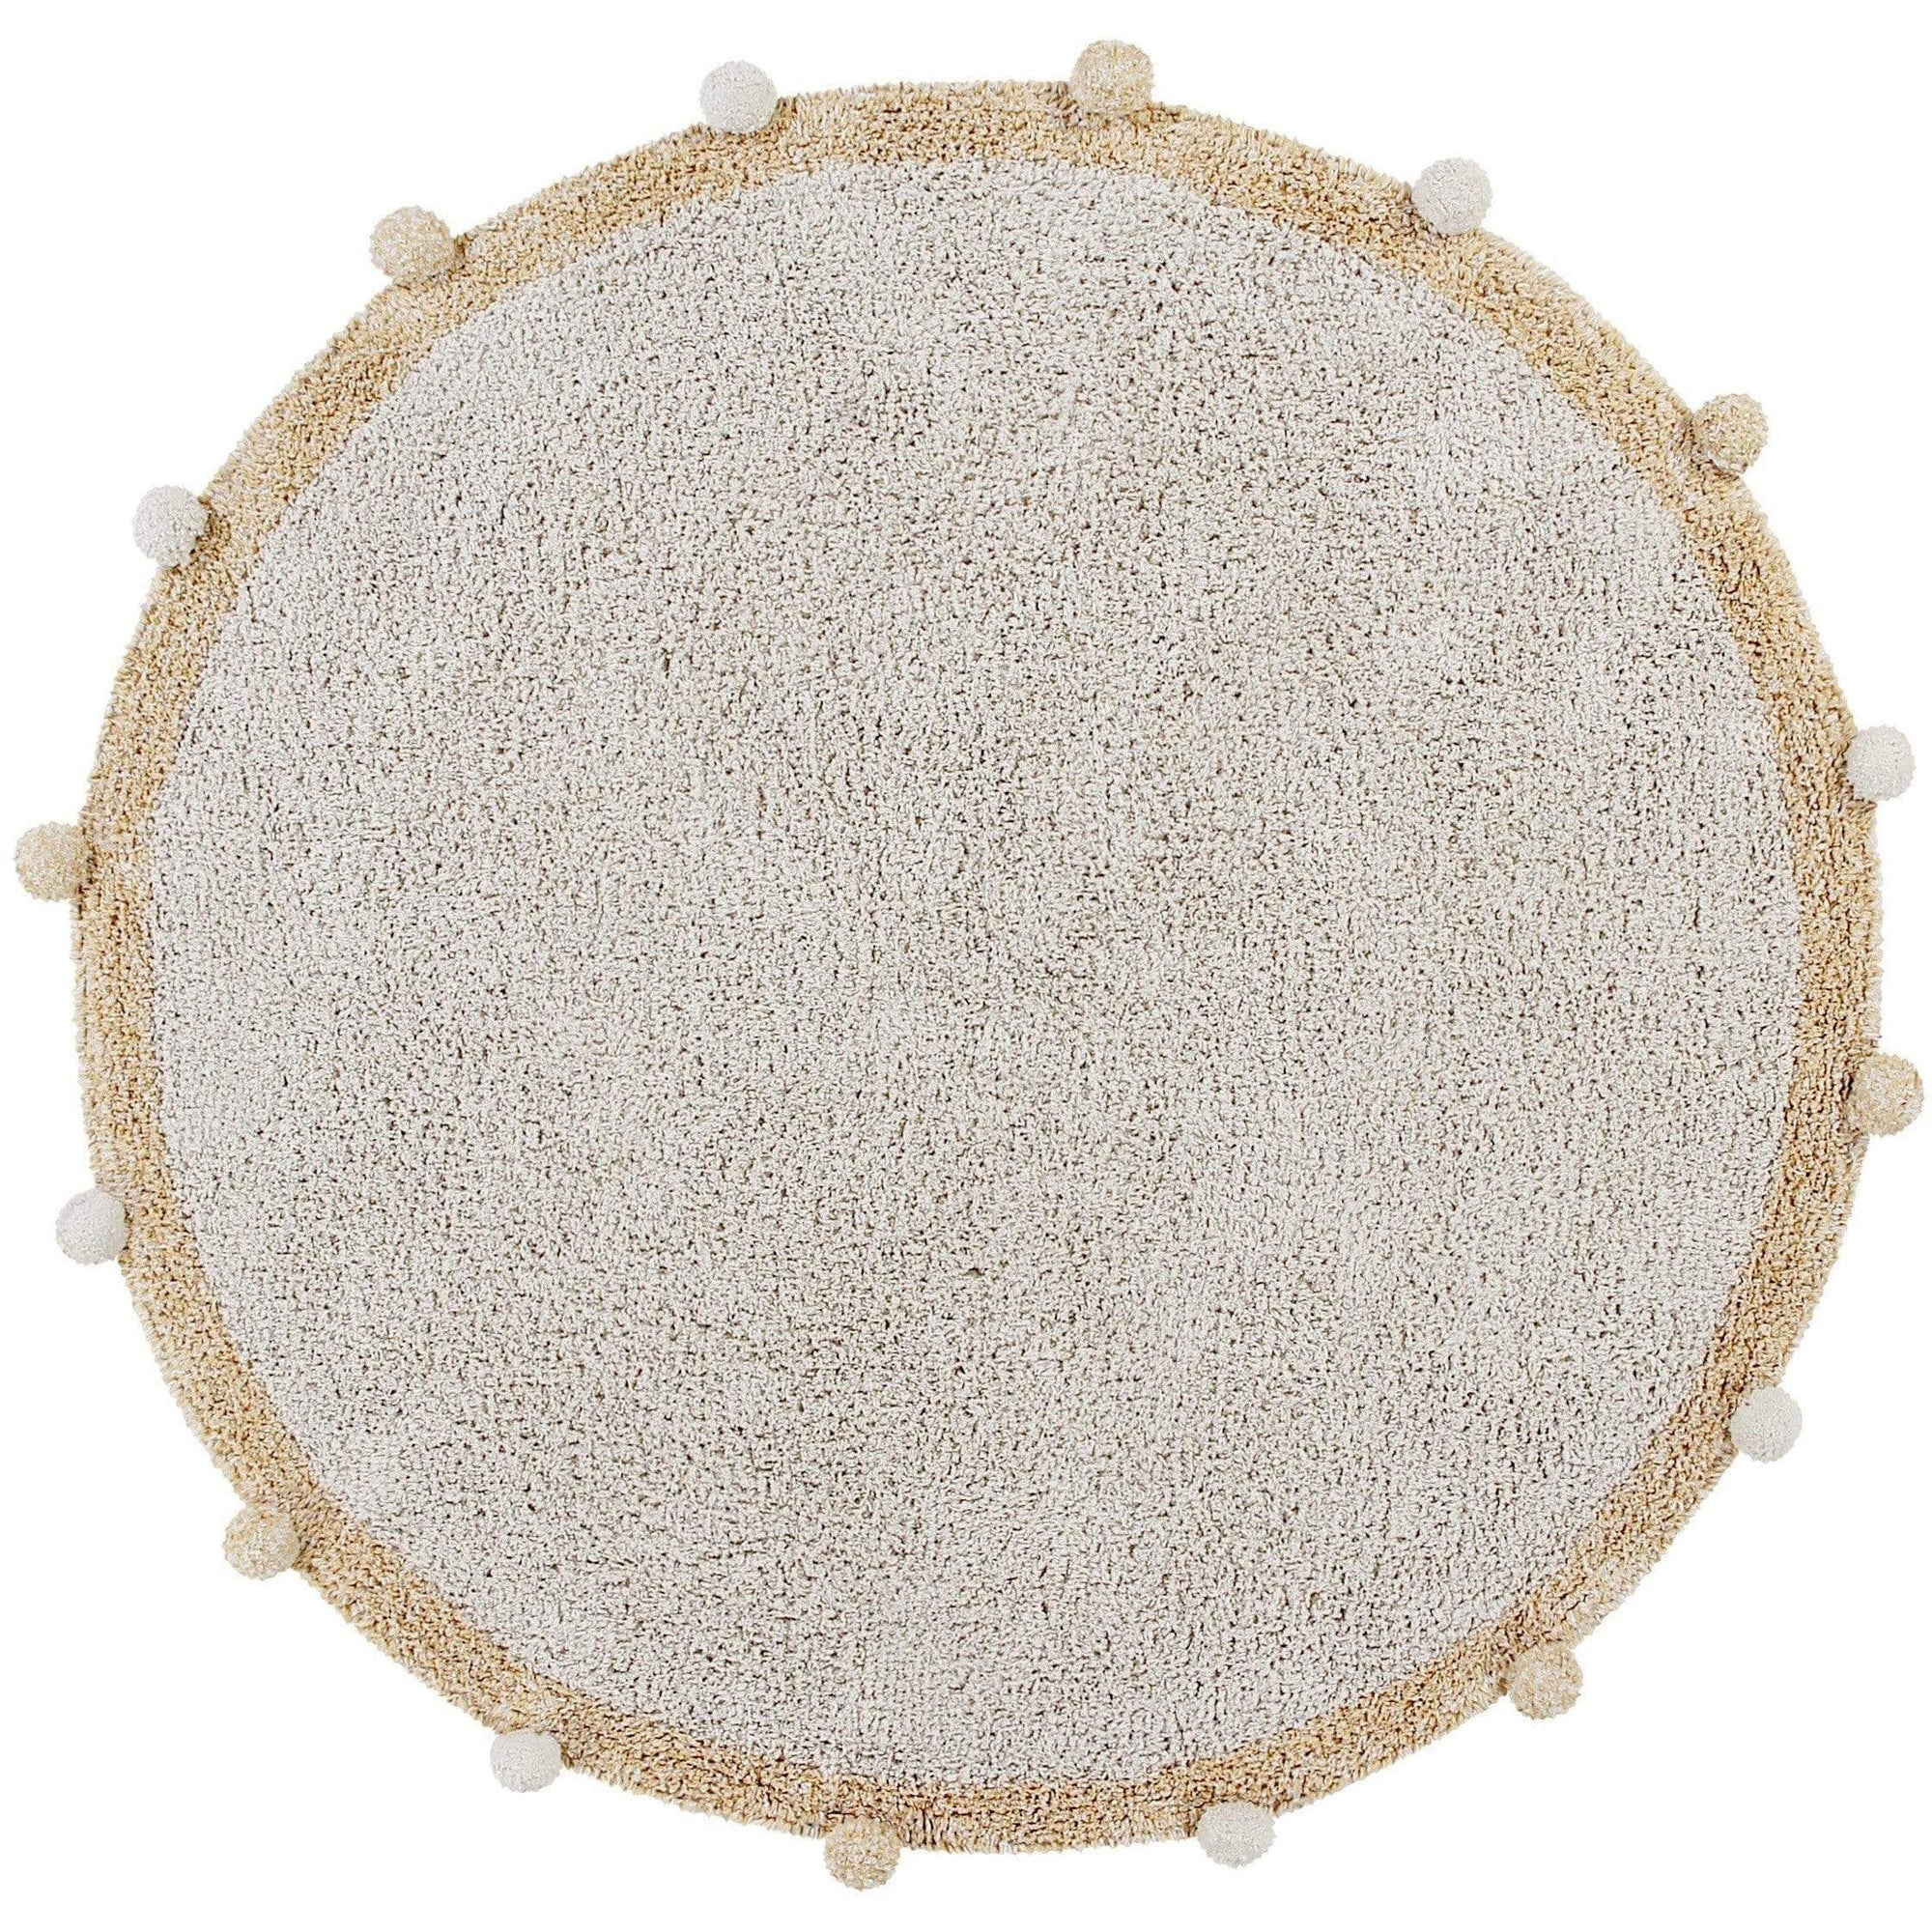 Rugs by Roo | Lorena Canals Bubbly Natural Honey Washable Area Rug-C-BUBBLY-HNY